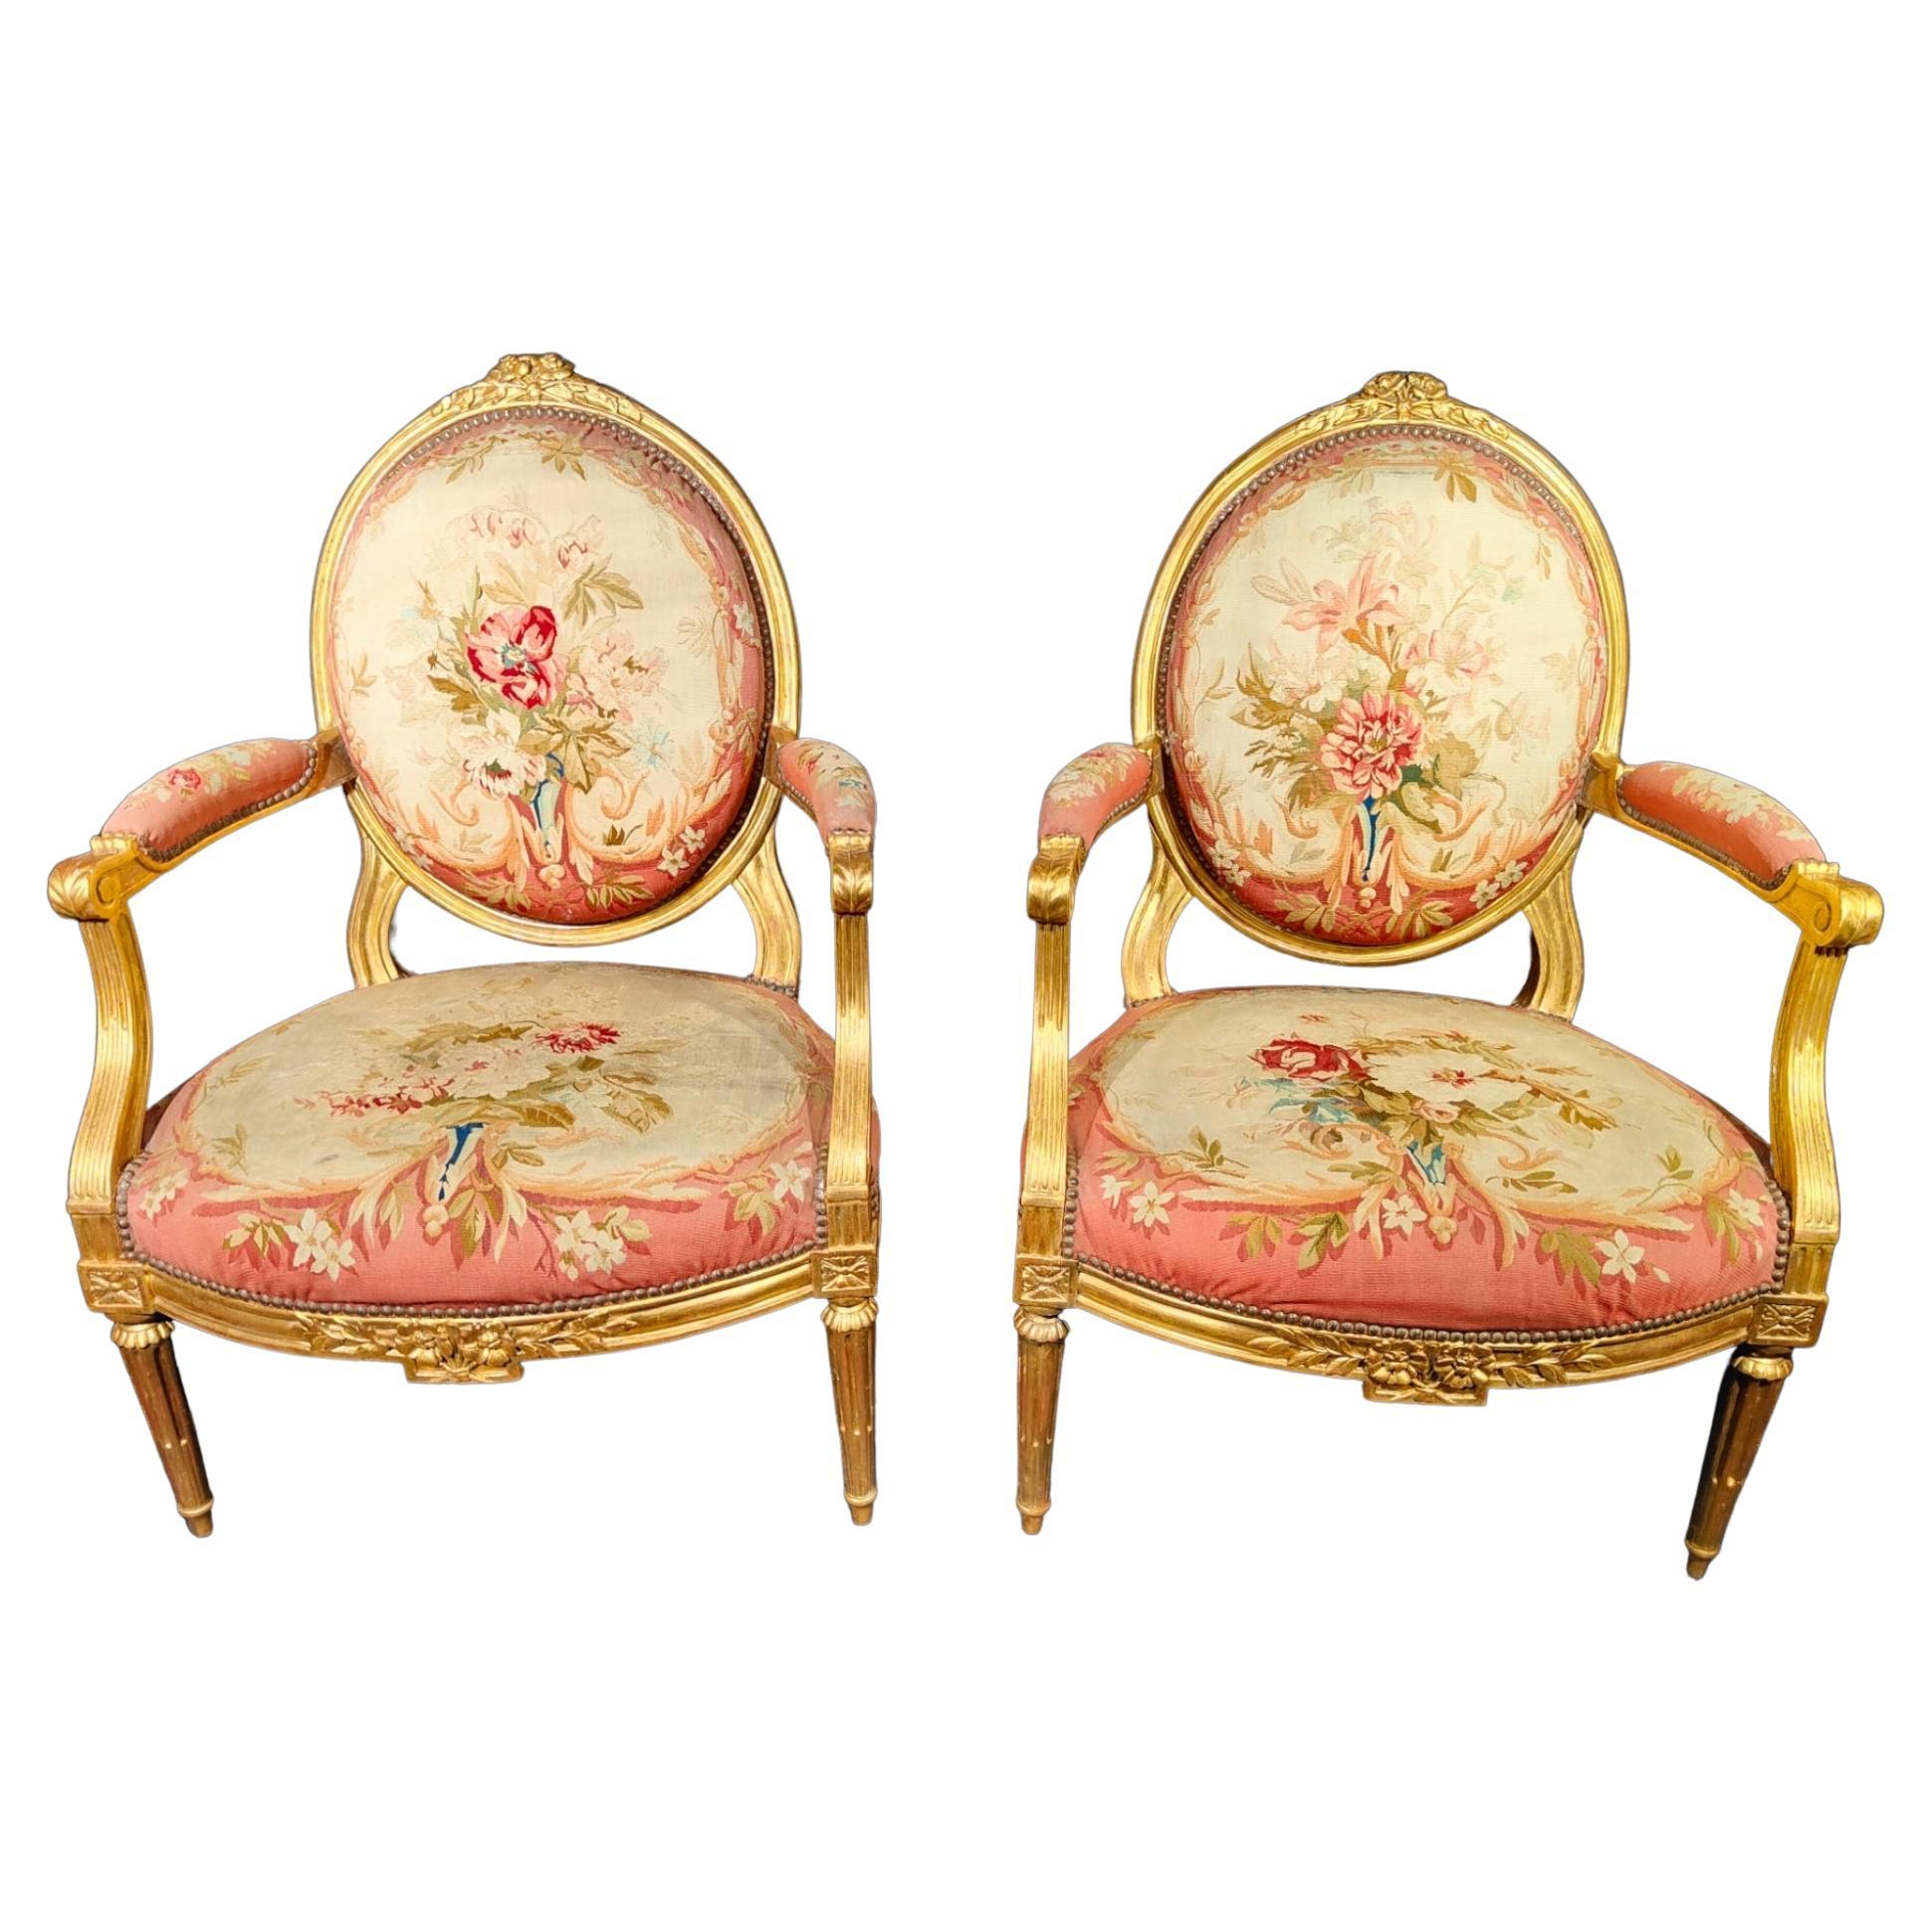 Important French Chairs From The 18th Century Signed By Claude Chevigny For Sale